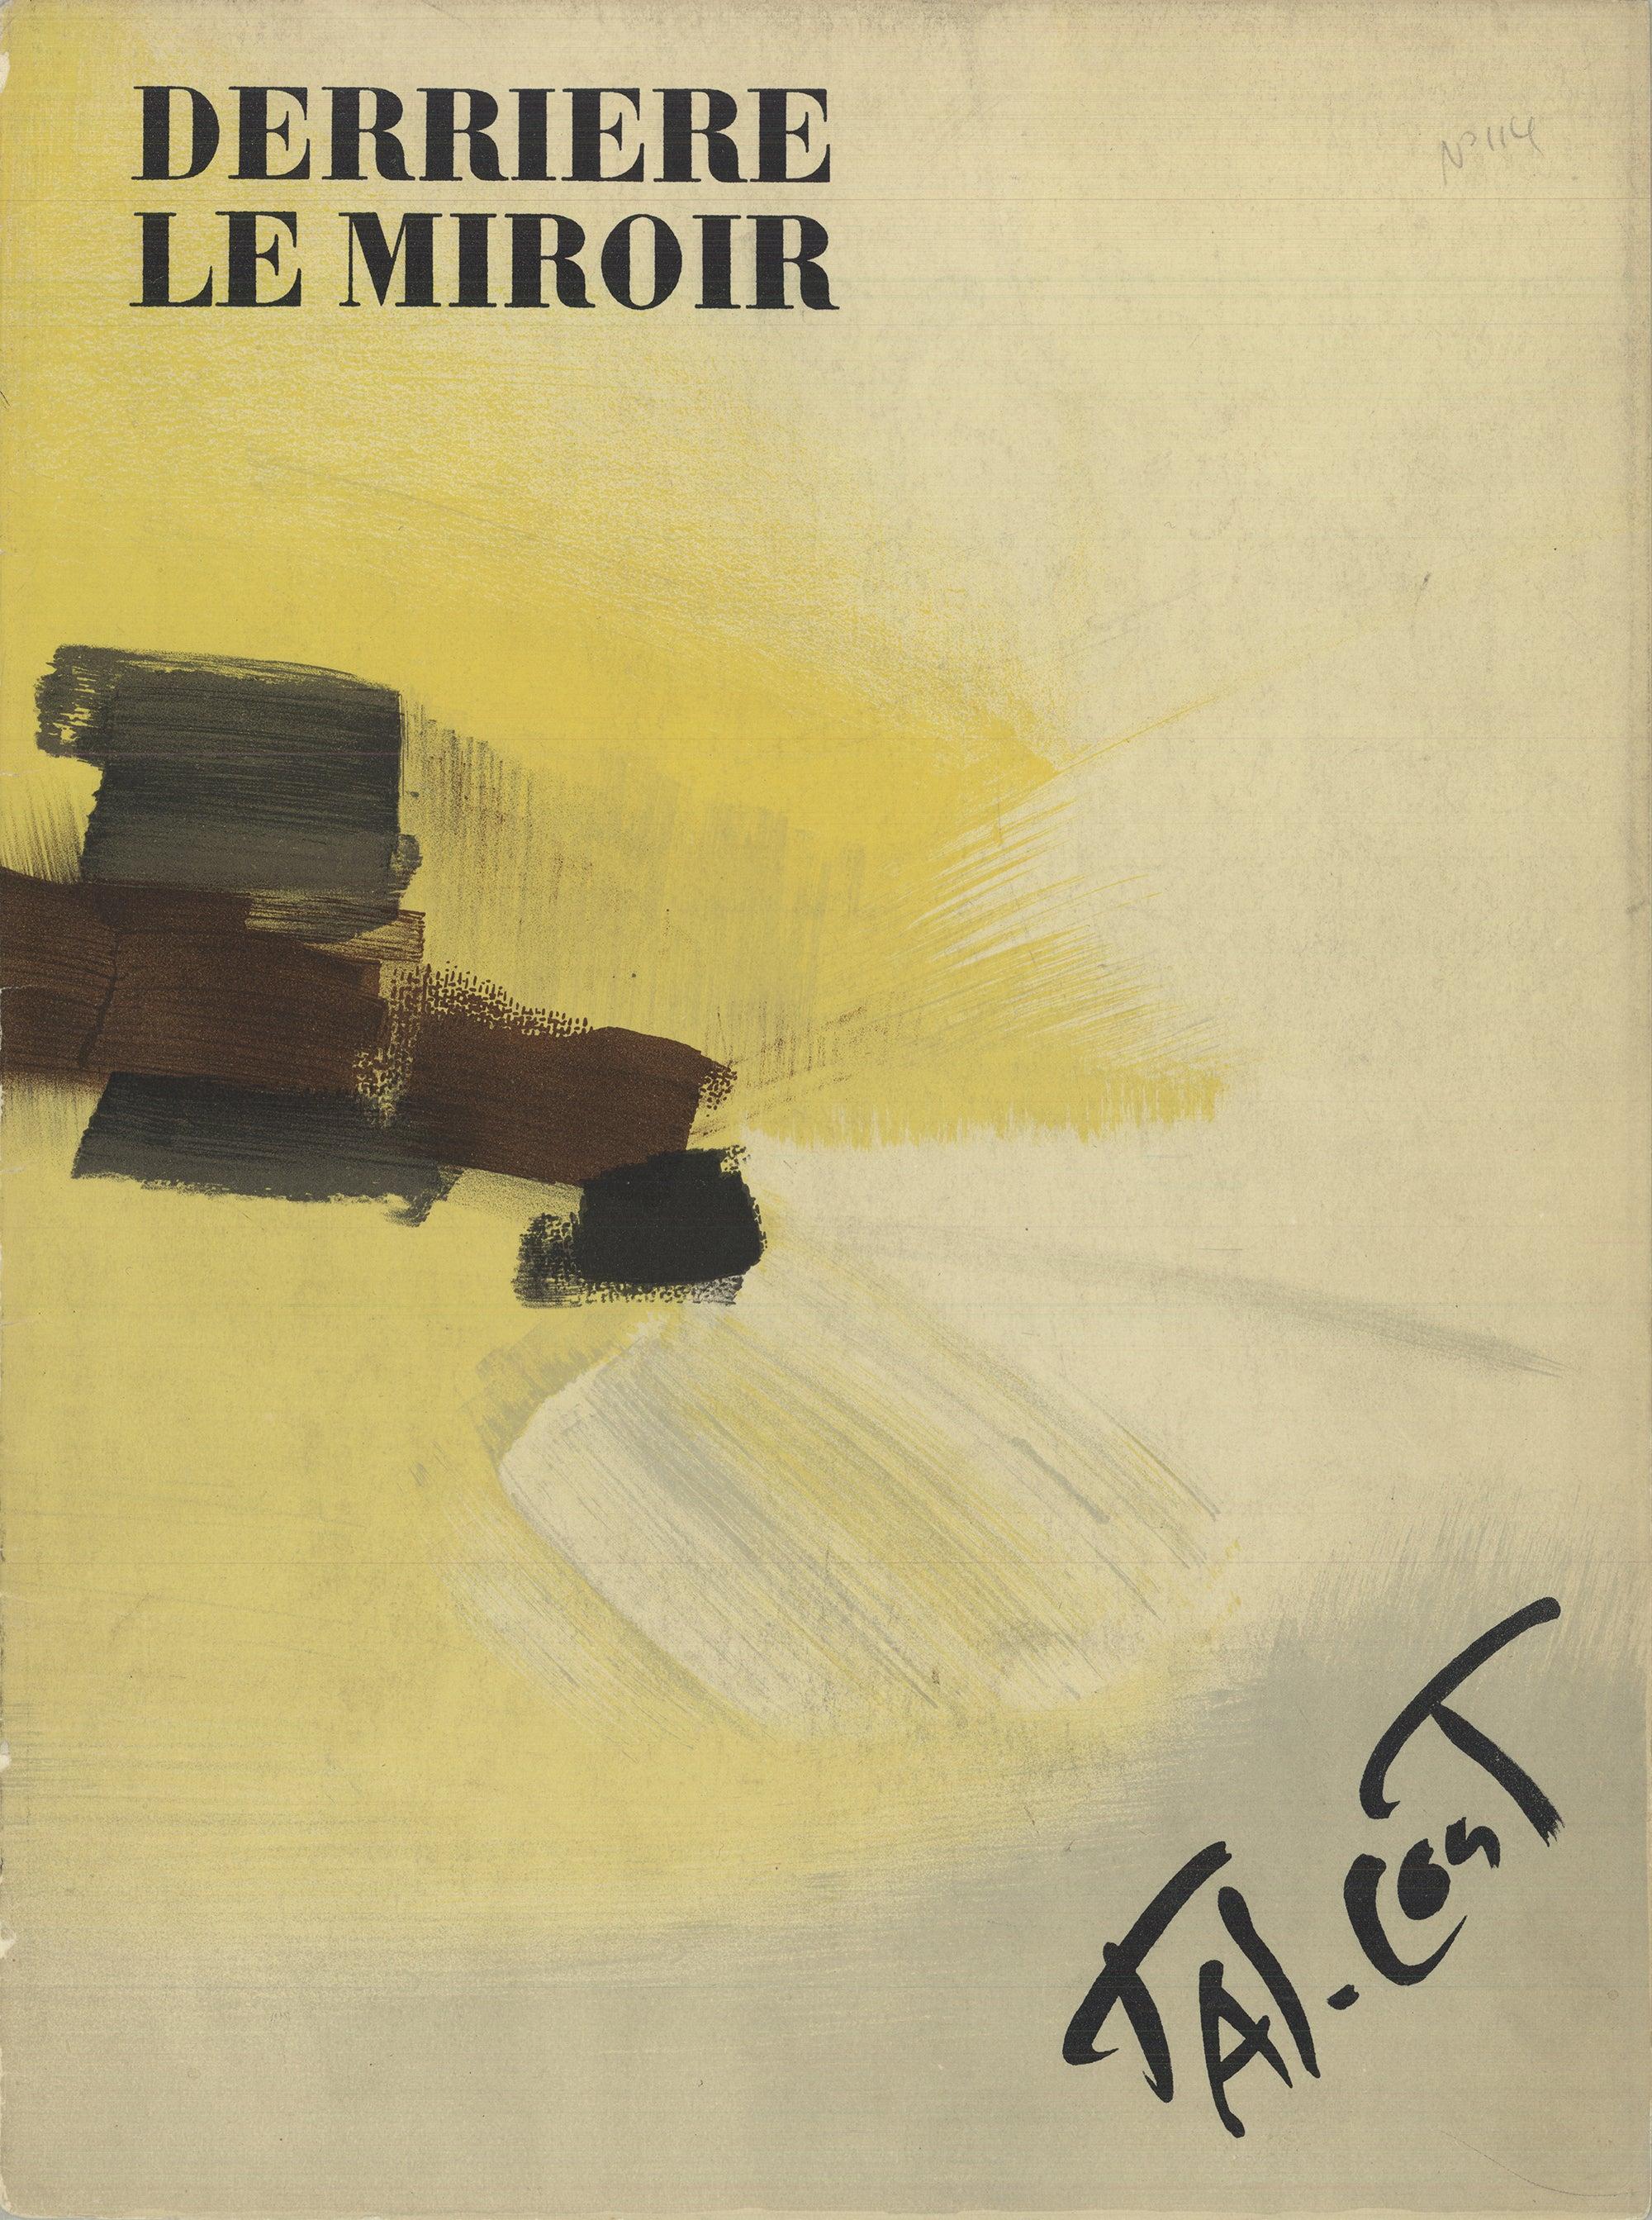 1959 Pierre Tal-Coat 'Derriere Le Miroir, no. 114 Cover' Abstract Yellow, Black  For Sale 1